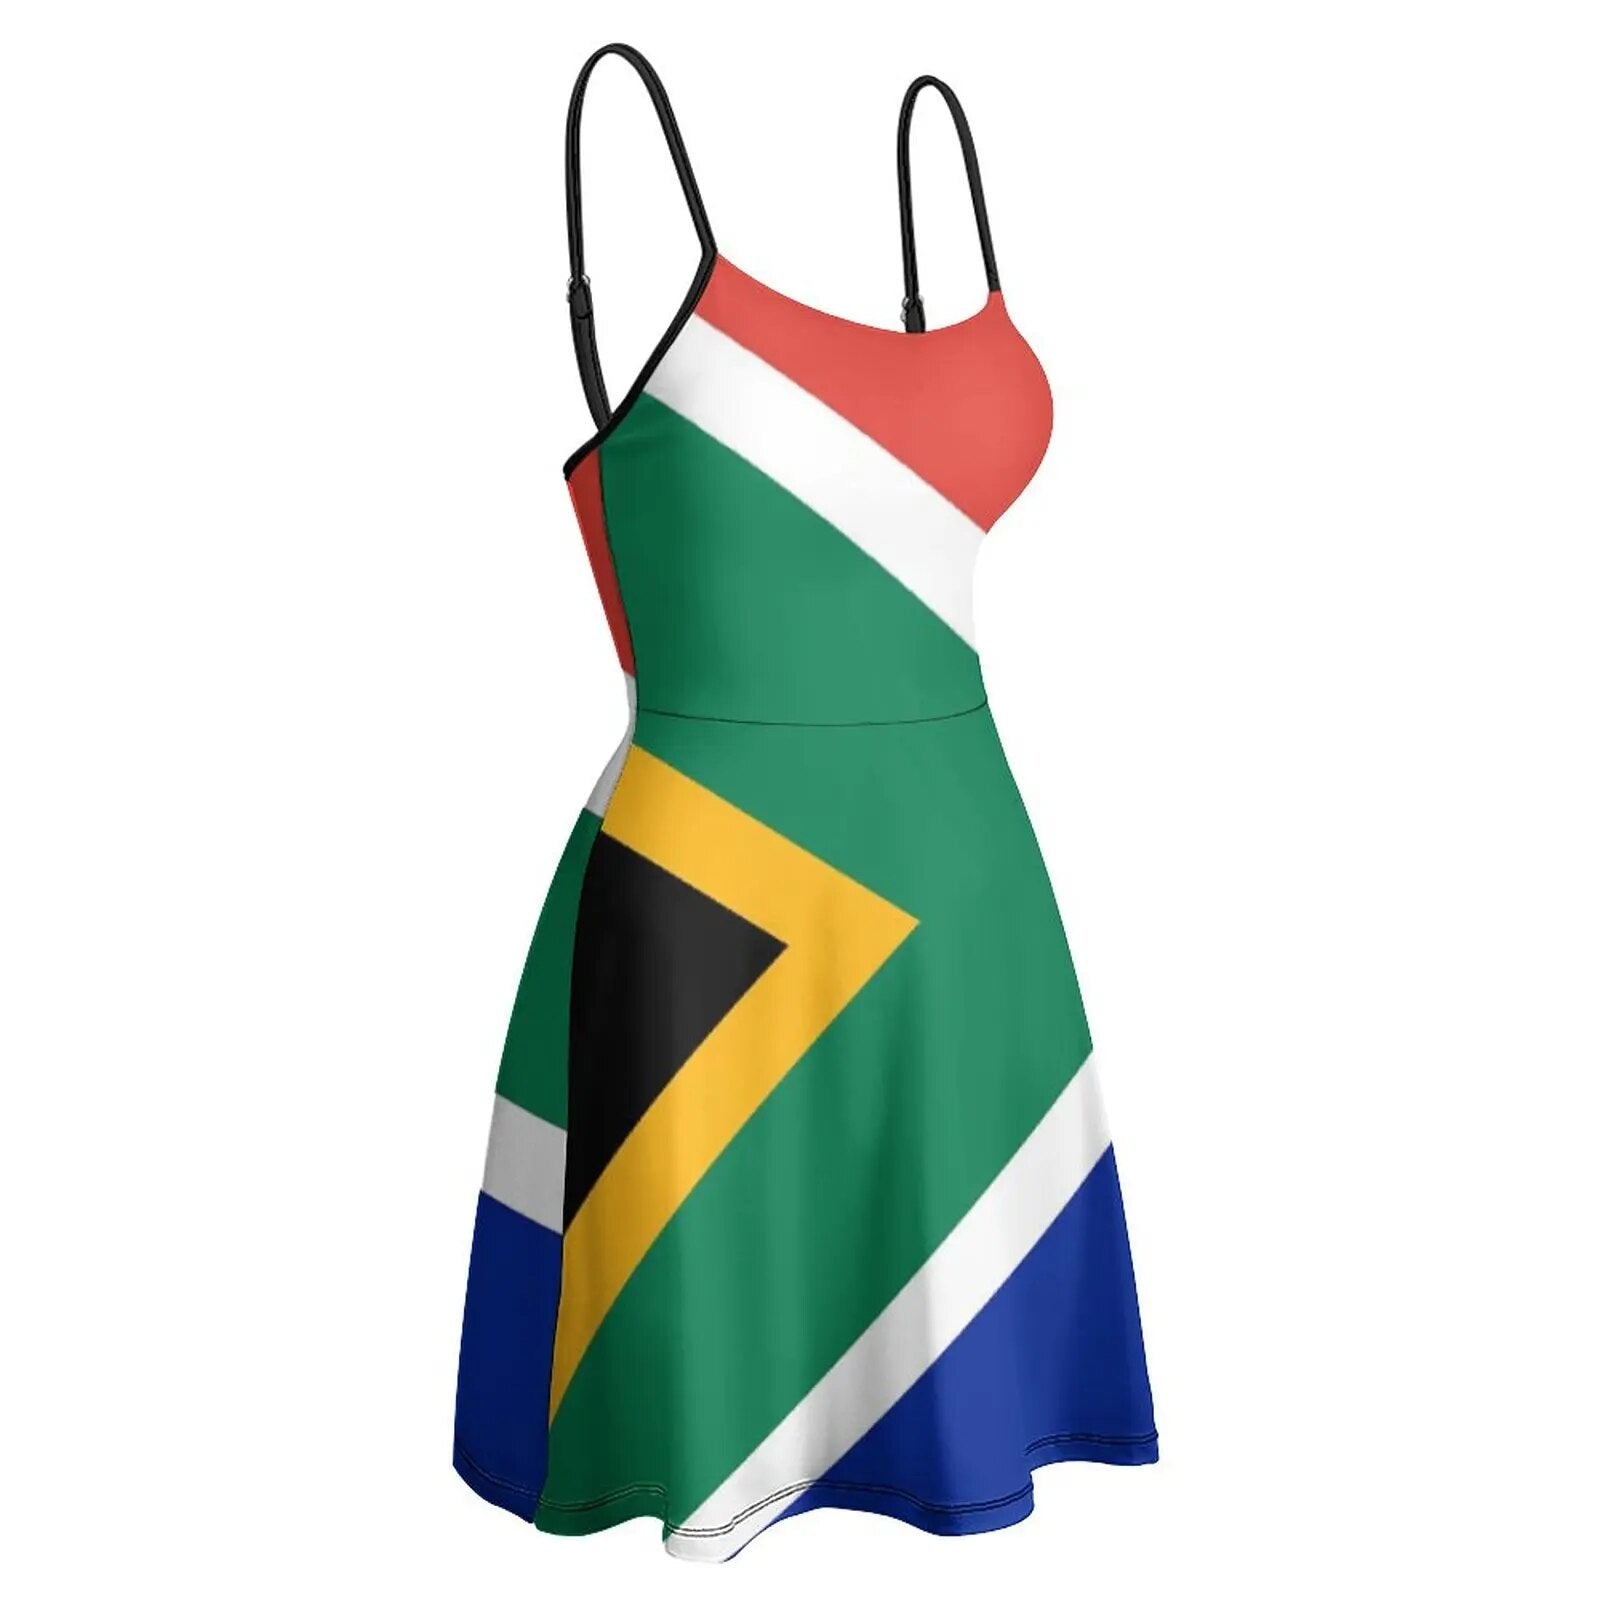 Elegant and Exotic Gown Inspired by South African Flag: A Unique Suspender Dress Blending Modern Styles - Flexi Africa - Flexi Africa offers Free Delivery Worldwide - Vibrant African traditional clothing showcasing bold prints and intricate designs